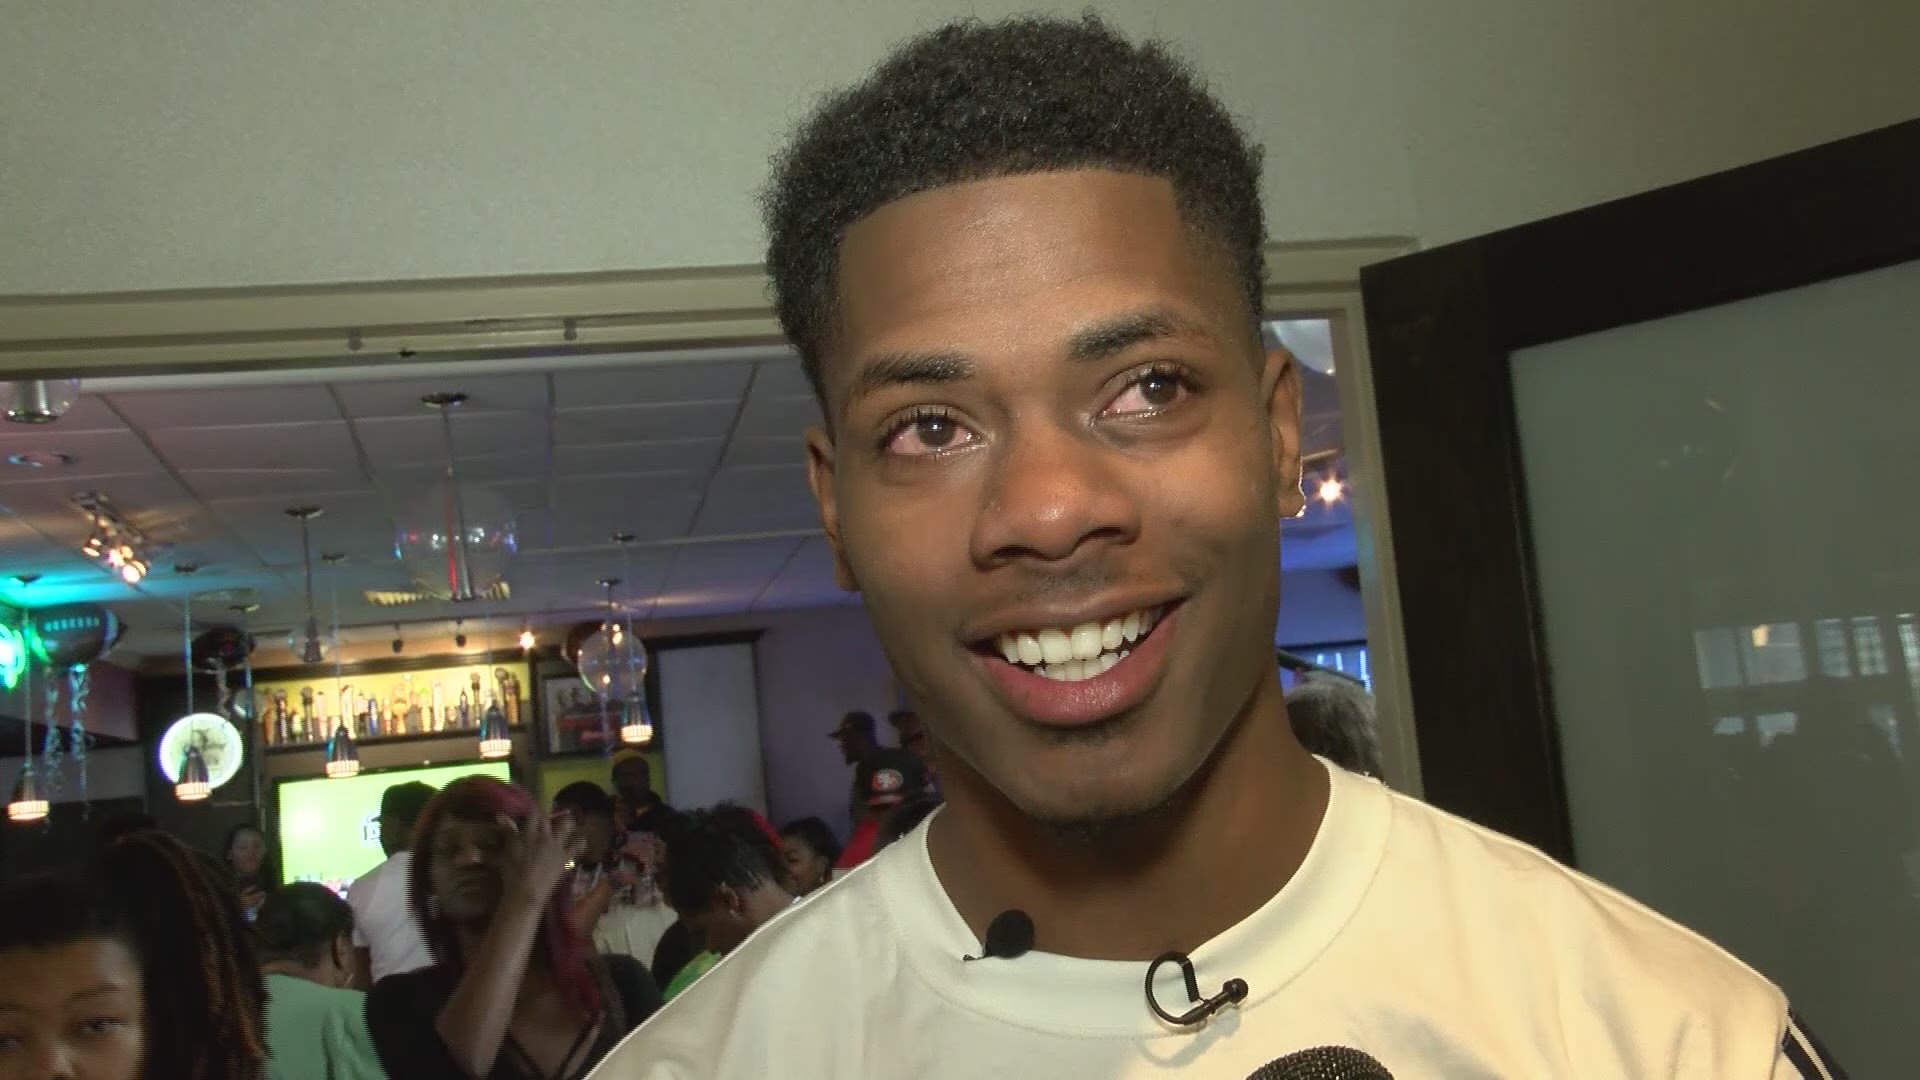 The LSU cornerback fought back tears of joy after learning he had been selected 46th overall by Cleveland.